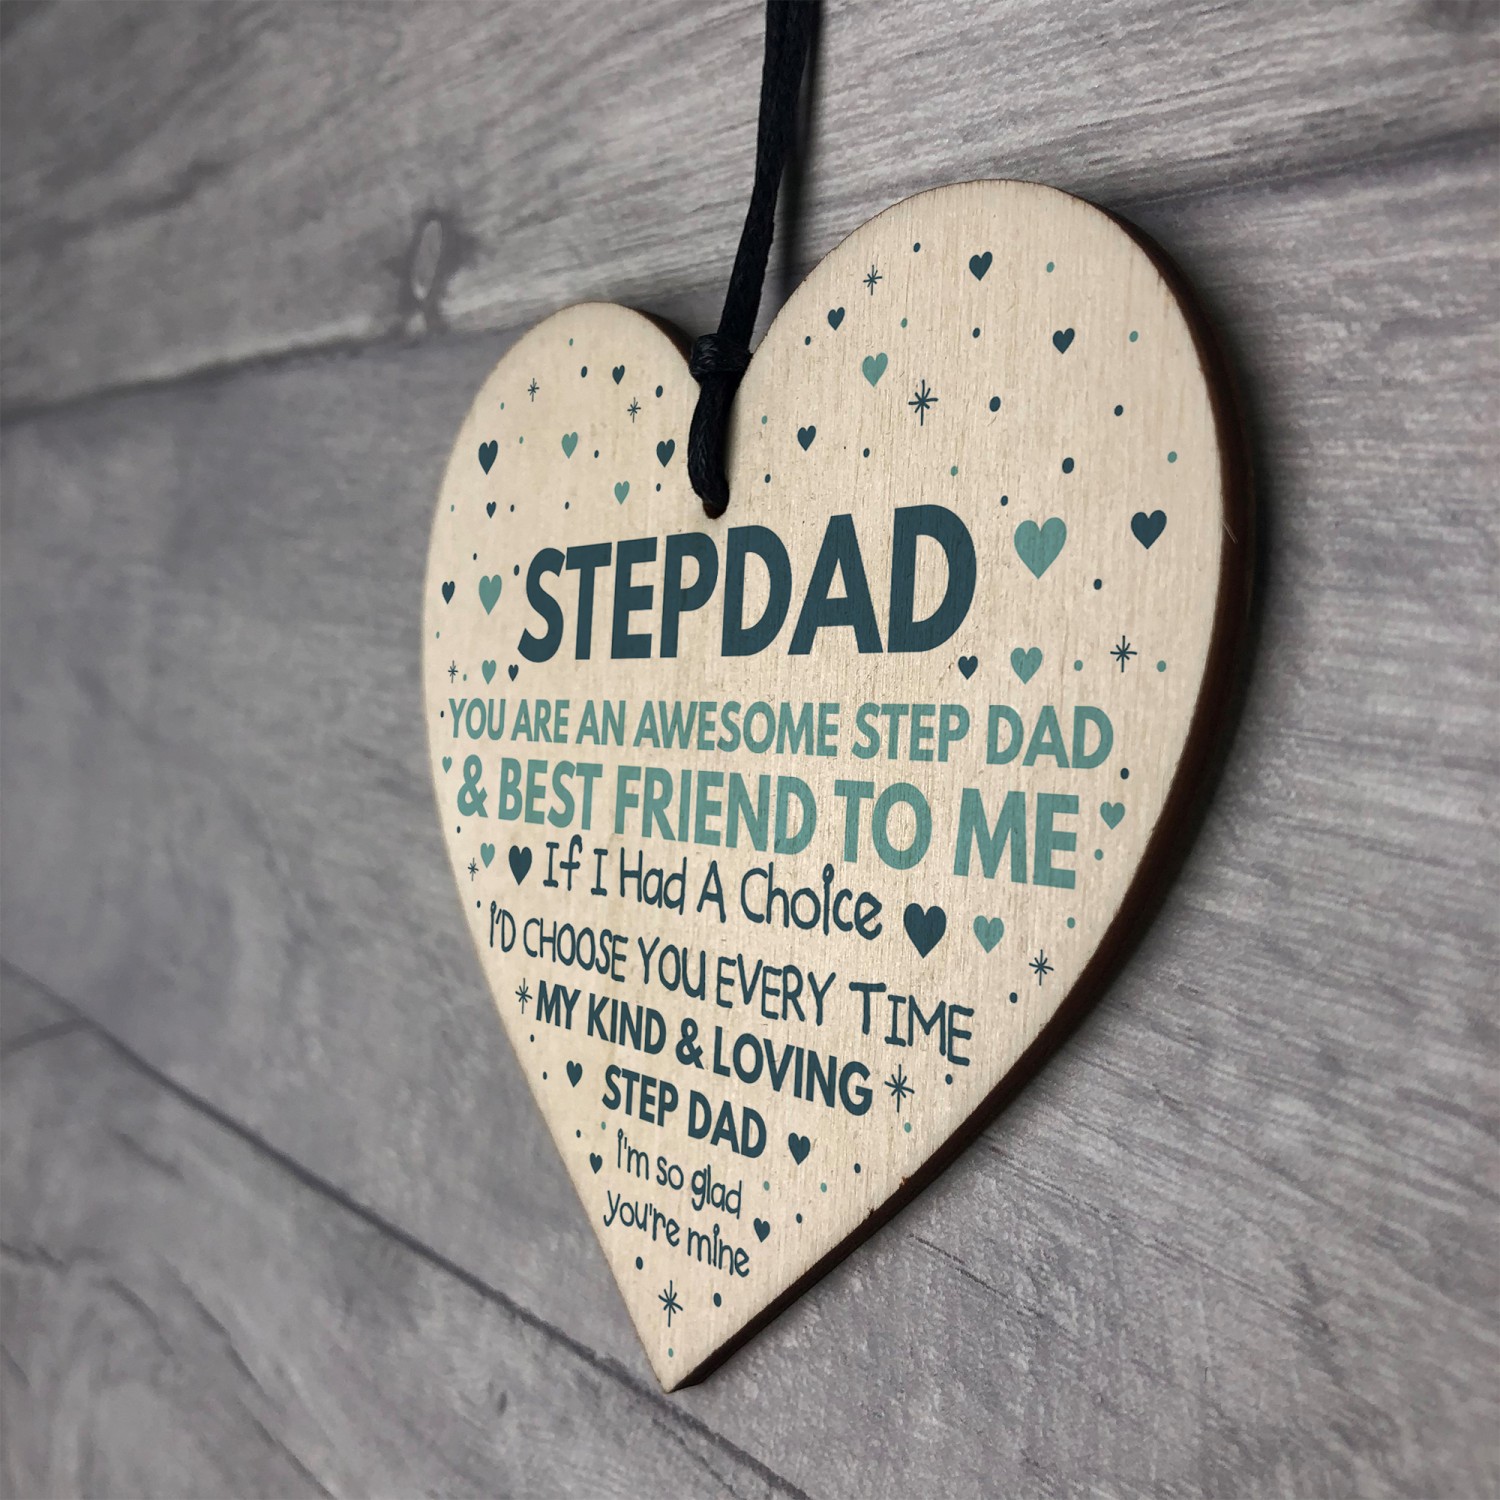 Step Dad Fathers Day Gifts for Best Step Dad Wooden Heart Gift